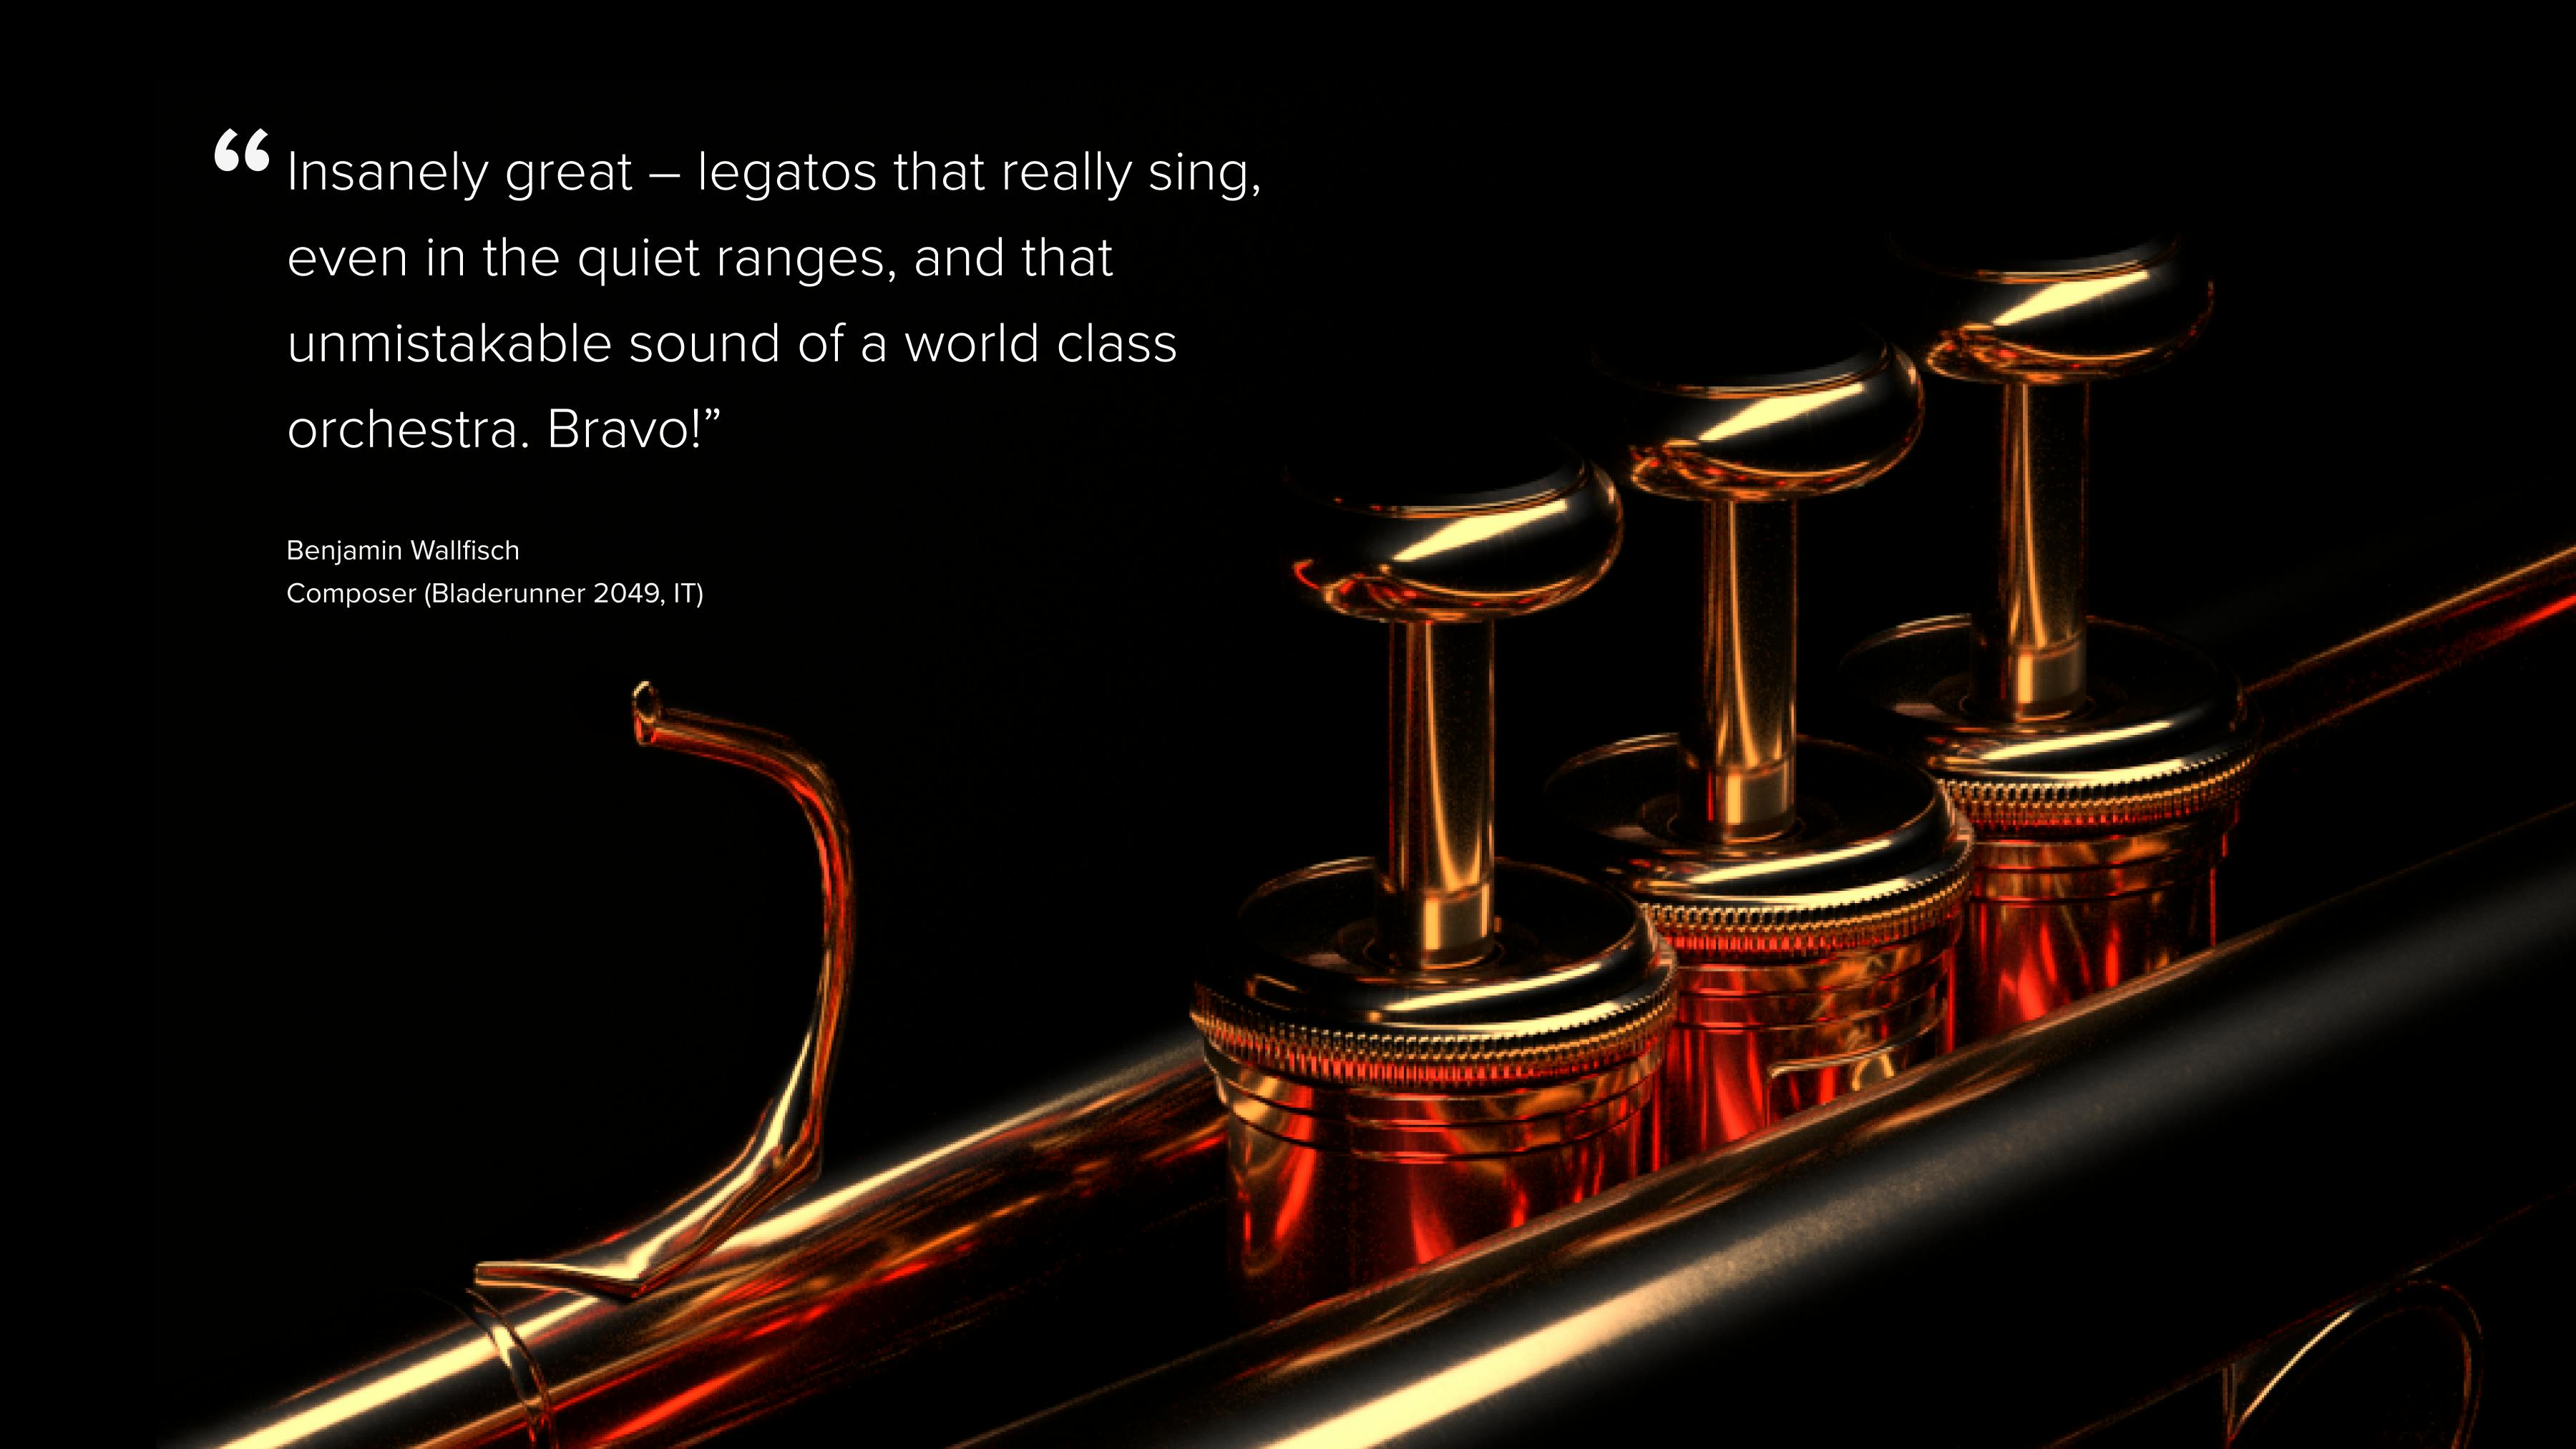 Brass valves up close with quote by Benjamin Wallfisch: "Insanely great – legatos that really sing, even in the quiet ranges, and that unmistakable sound of a world class orchestra. Bravo!”